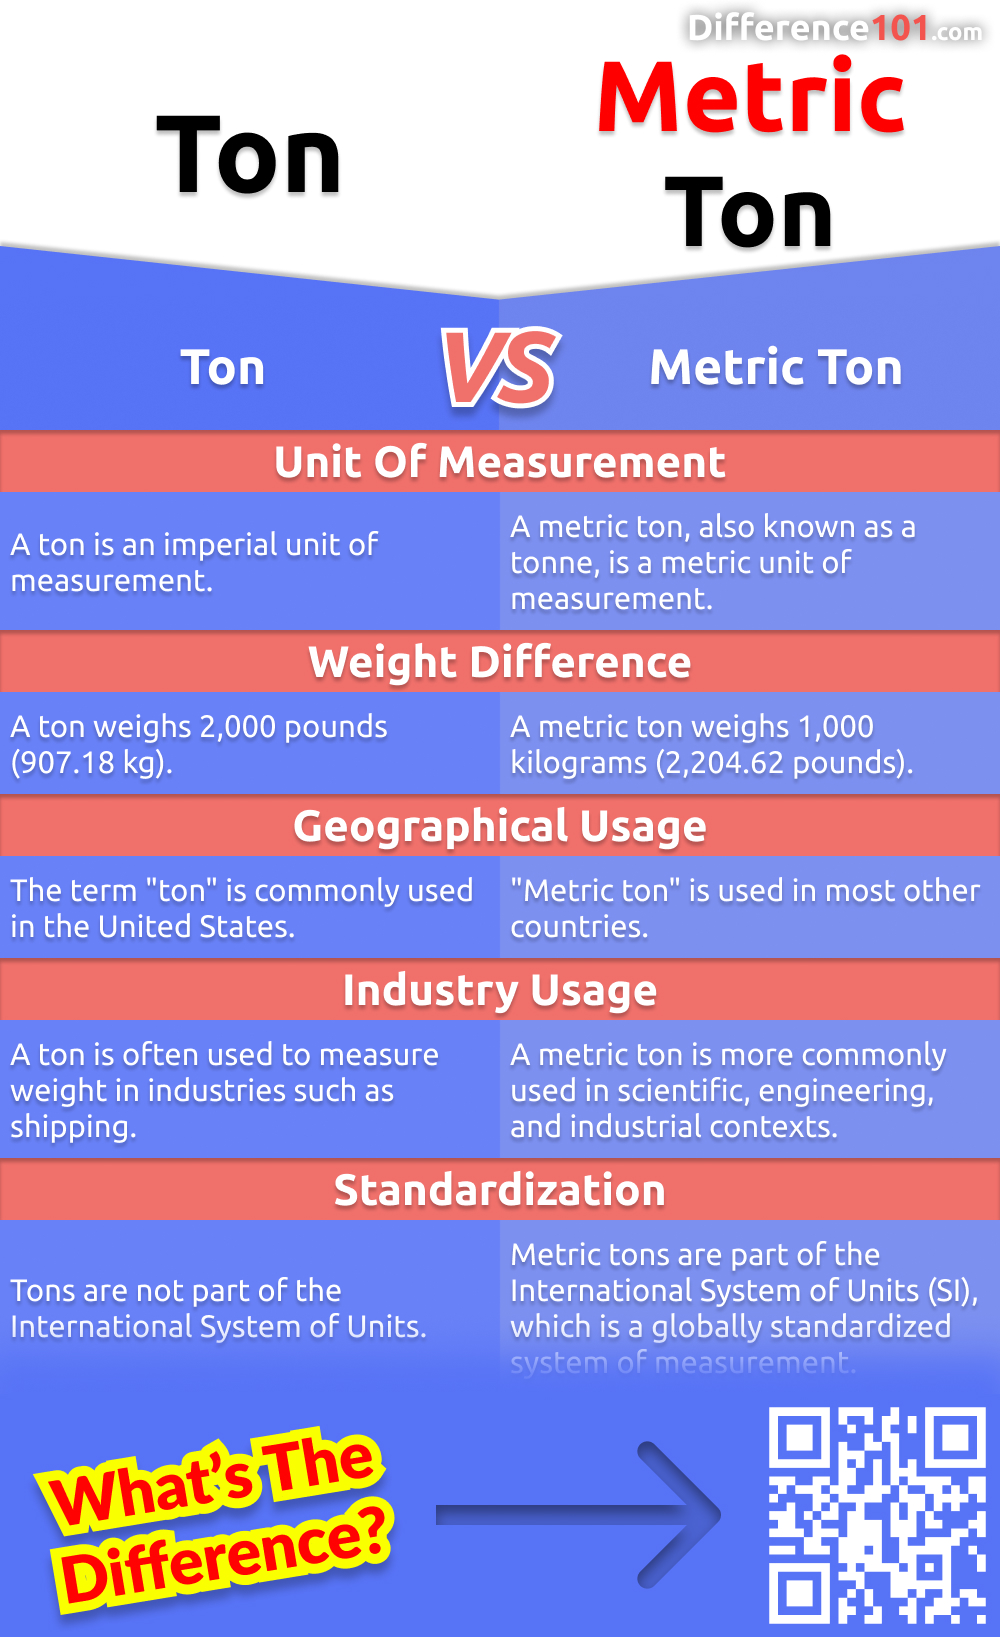 What's the difference between a metric ton and a ton? What are the pros and cons of each? We'll help you understand the answer to these questions and more in this comprehensive blog.